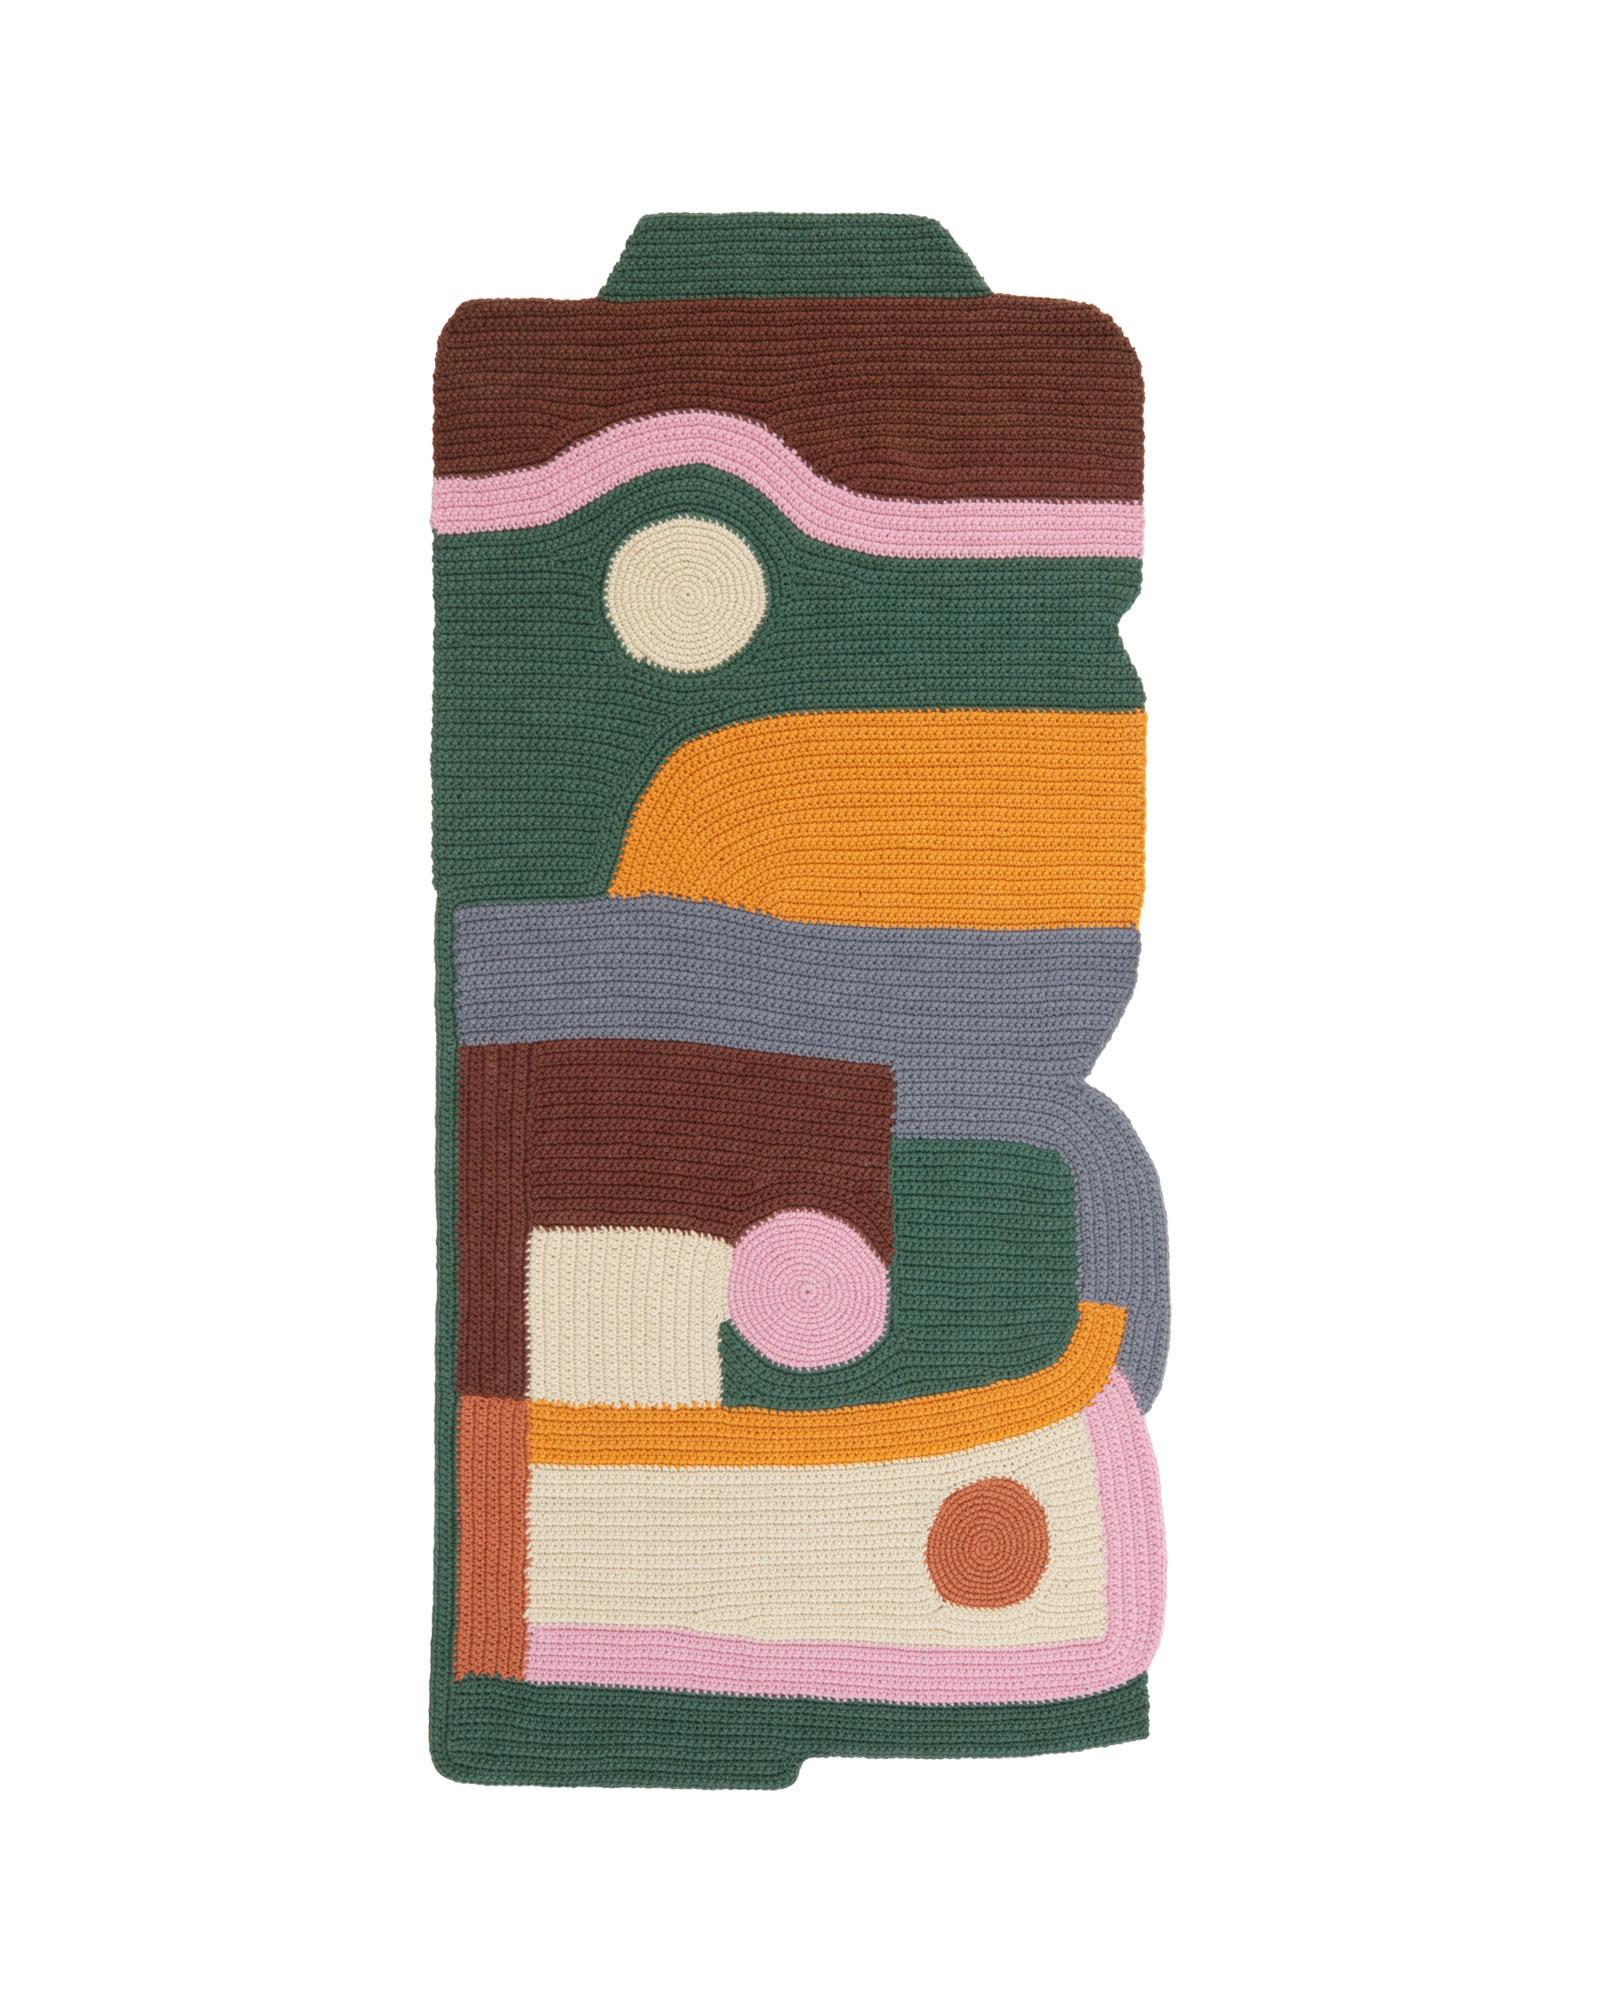 cc-tapis LOOPY RECTANGULAR handmade rug by Clara von Zweigbergk In New Condition For Sale In Brooklyn, NY